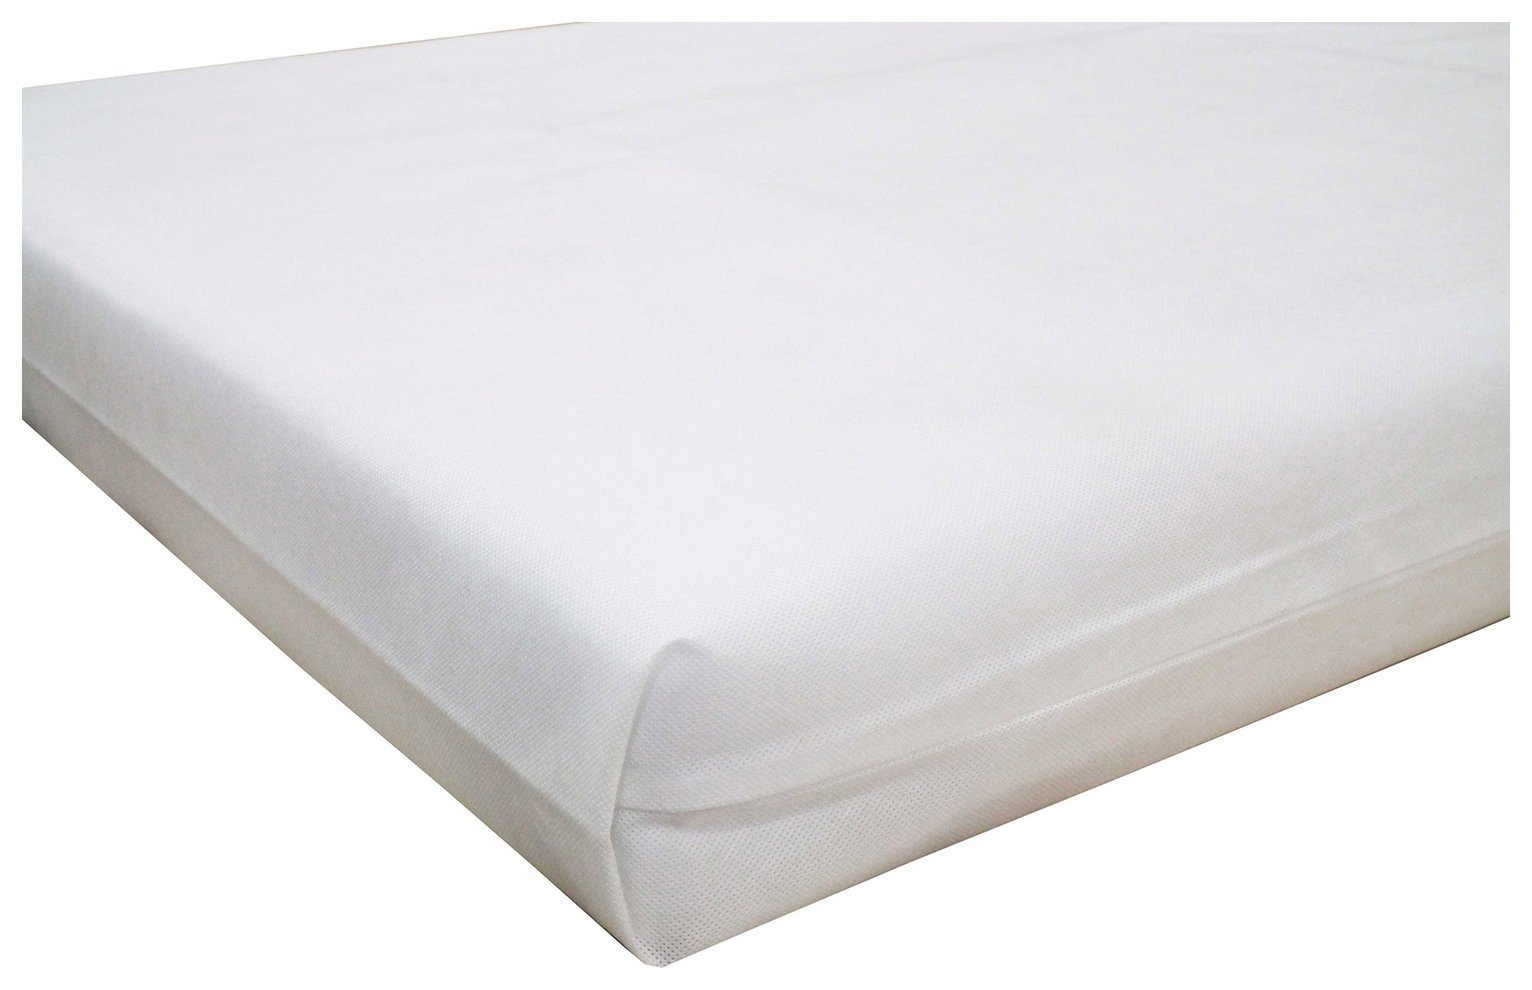 cot mattresses made to size